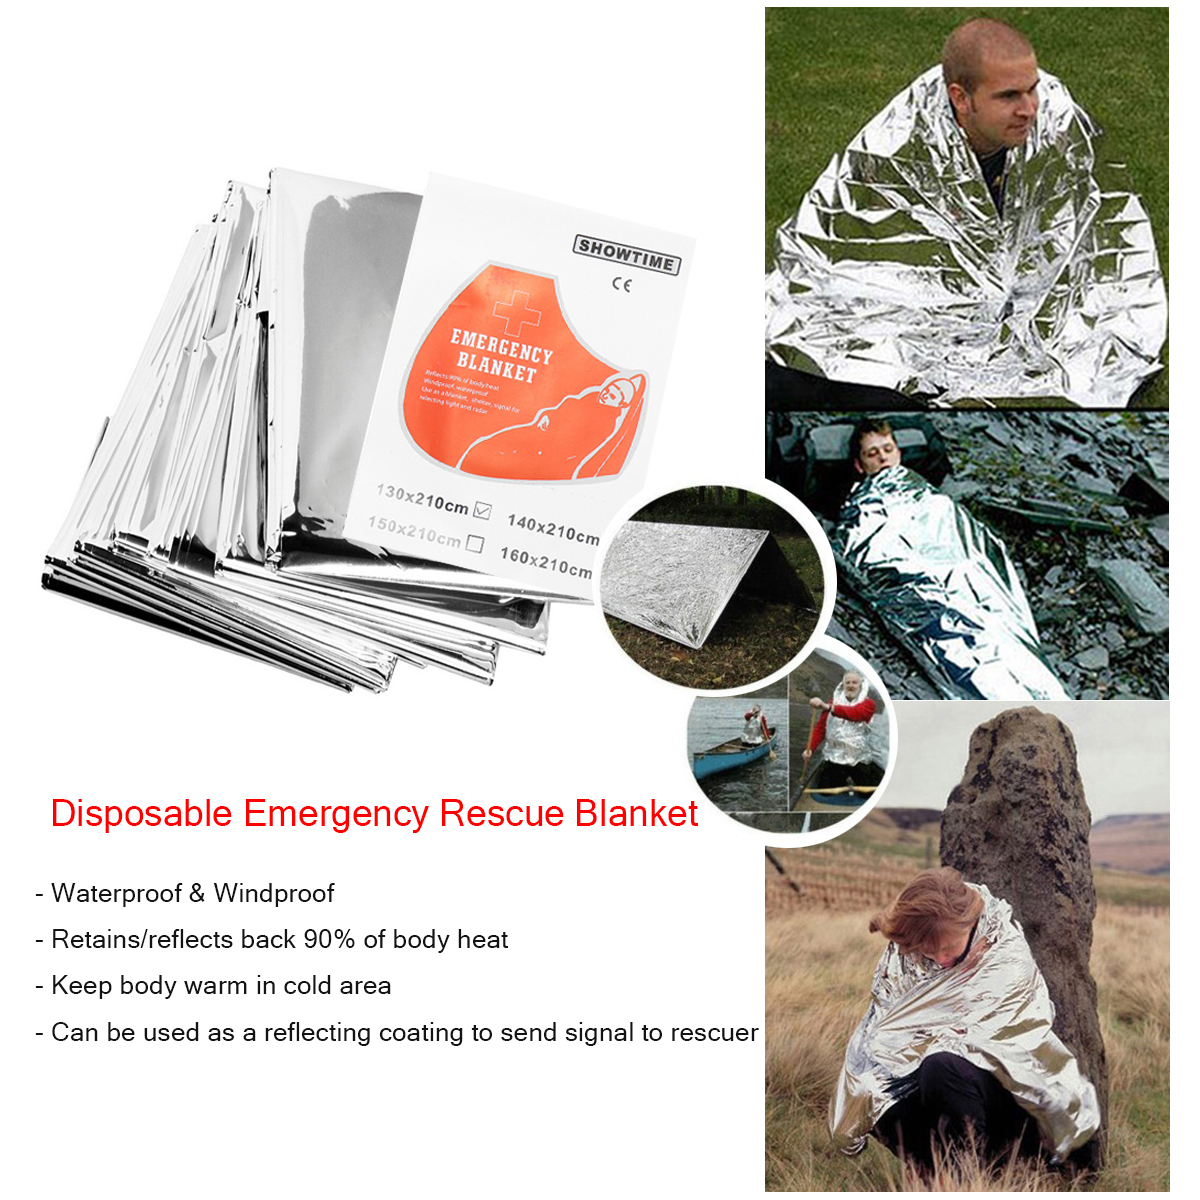 Upgraded-Outdoor-Emergency-Survival-First-Aid-Kit-Gear-for-Home-Office-Car-Boat-Camping-Hiking-Trave-1415500-3